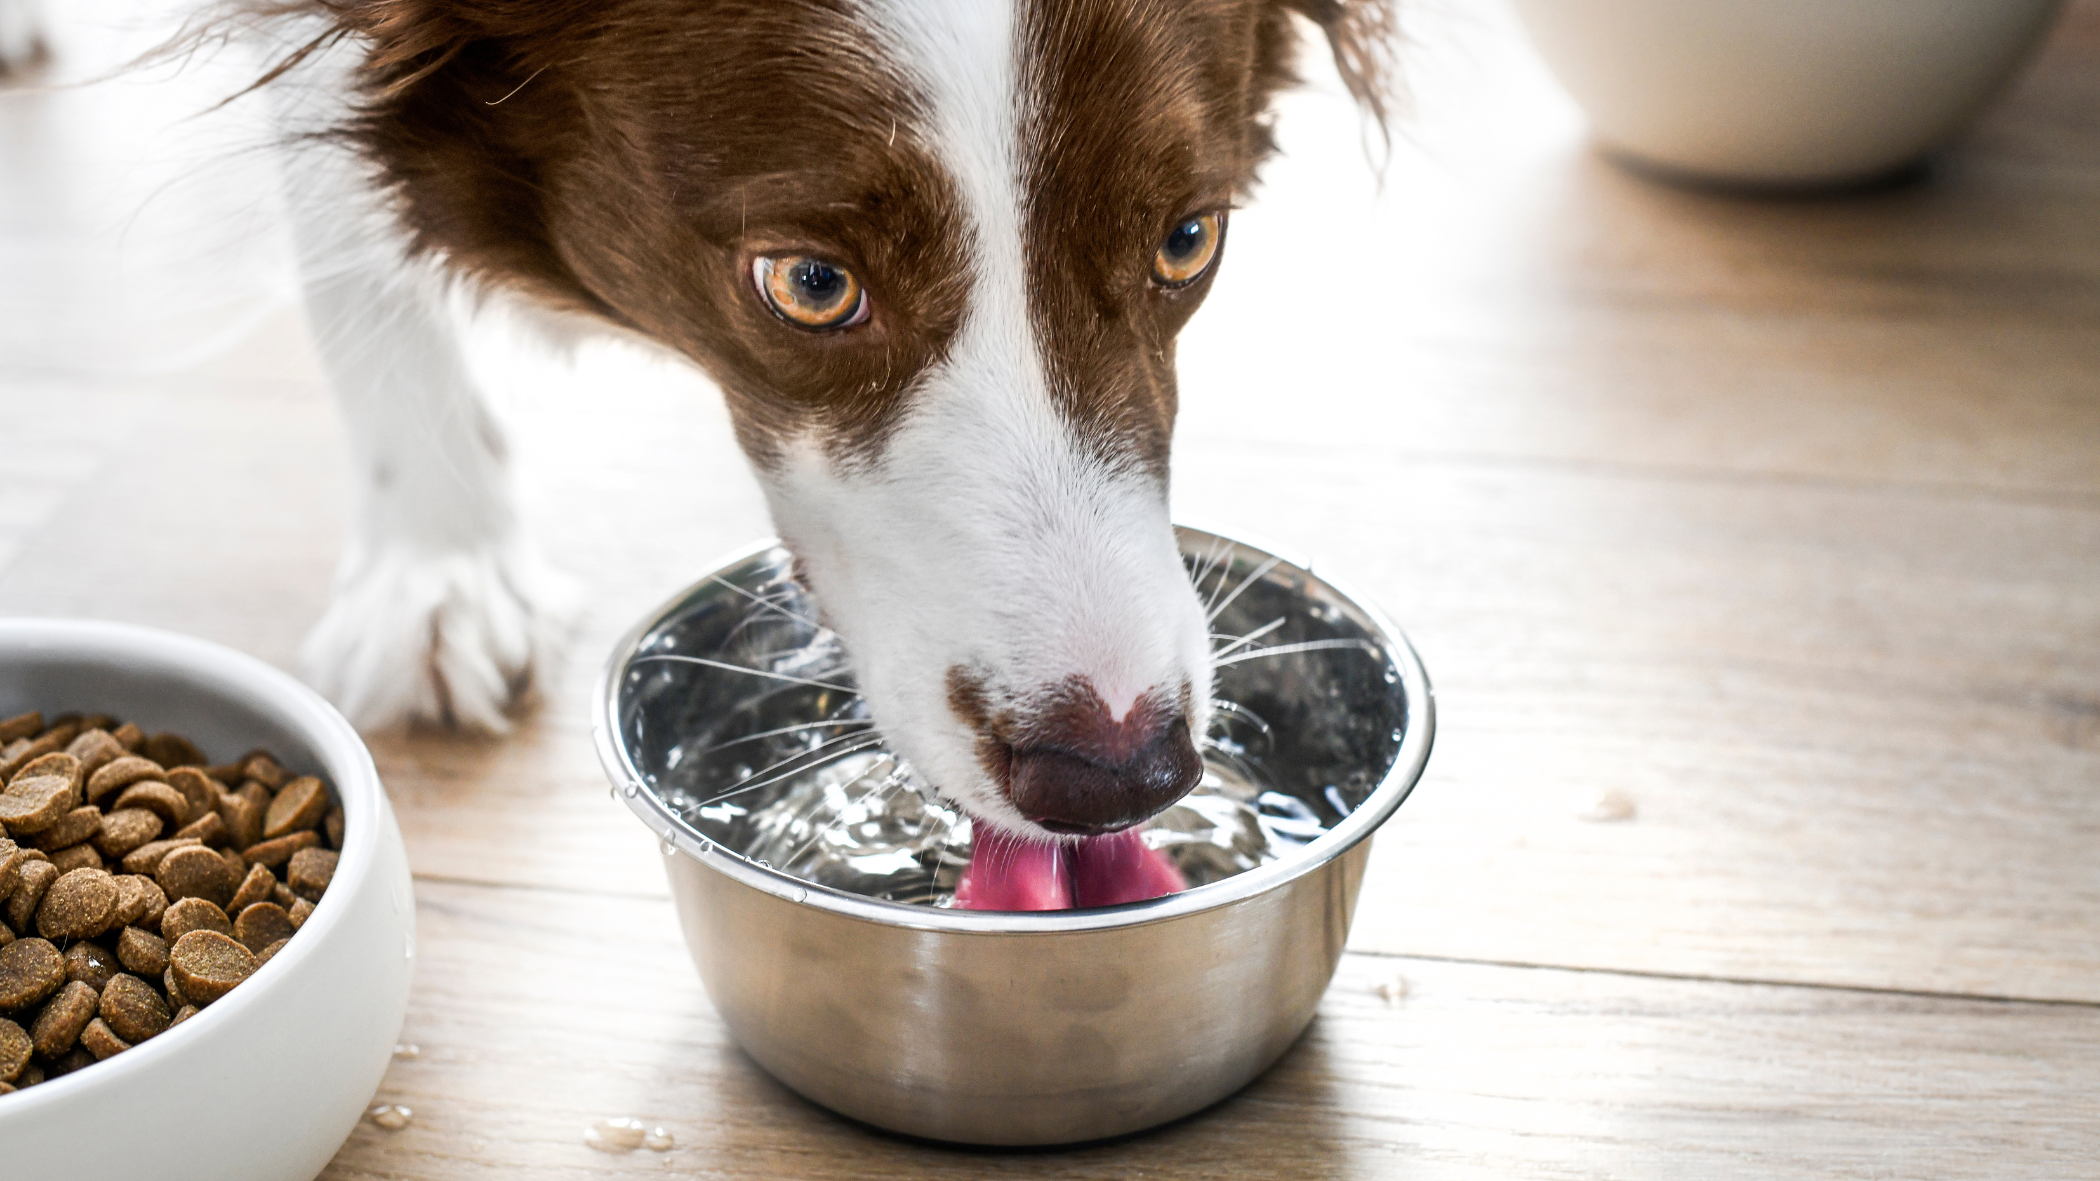 Water Intoxication in Dogs: Can Dogs Drink Too Much Water?